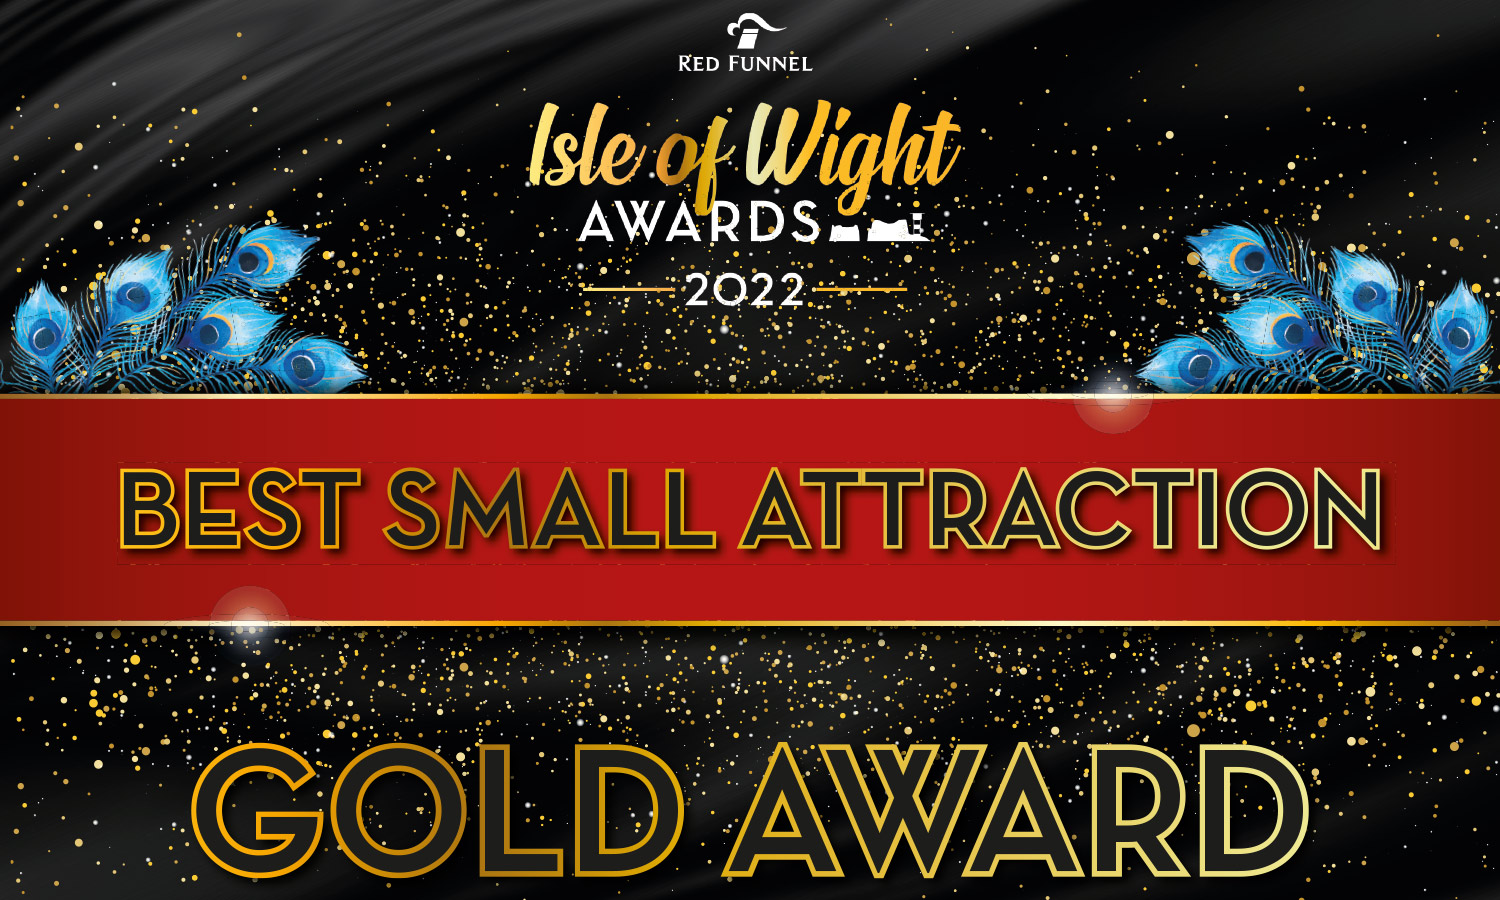 My Isle of Wight Best Small Attraction 2022 winner